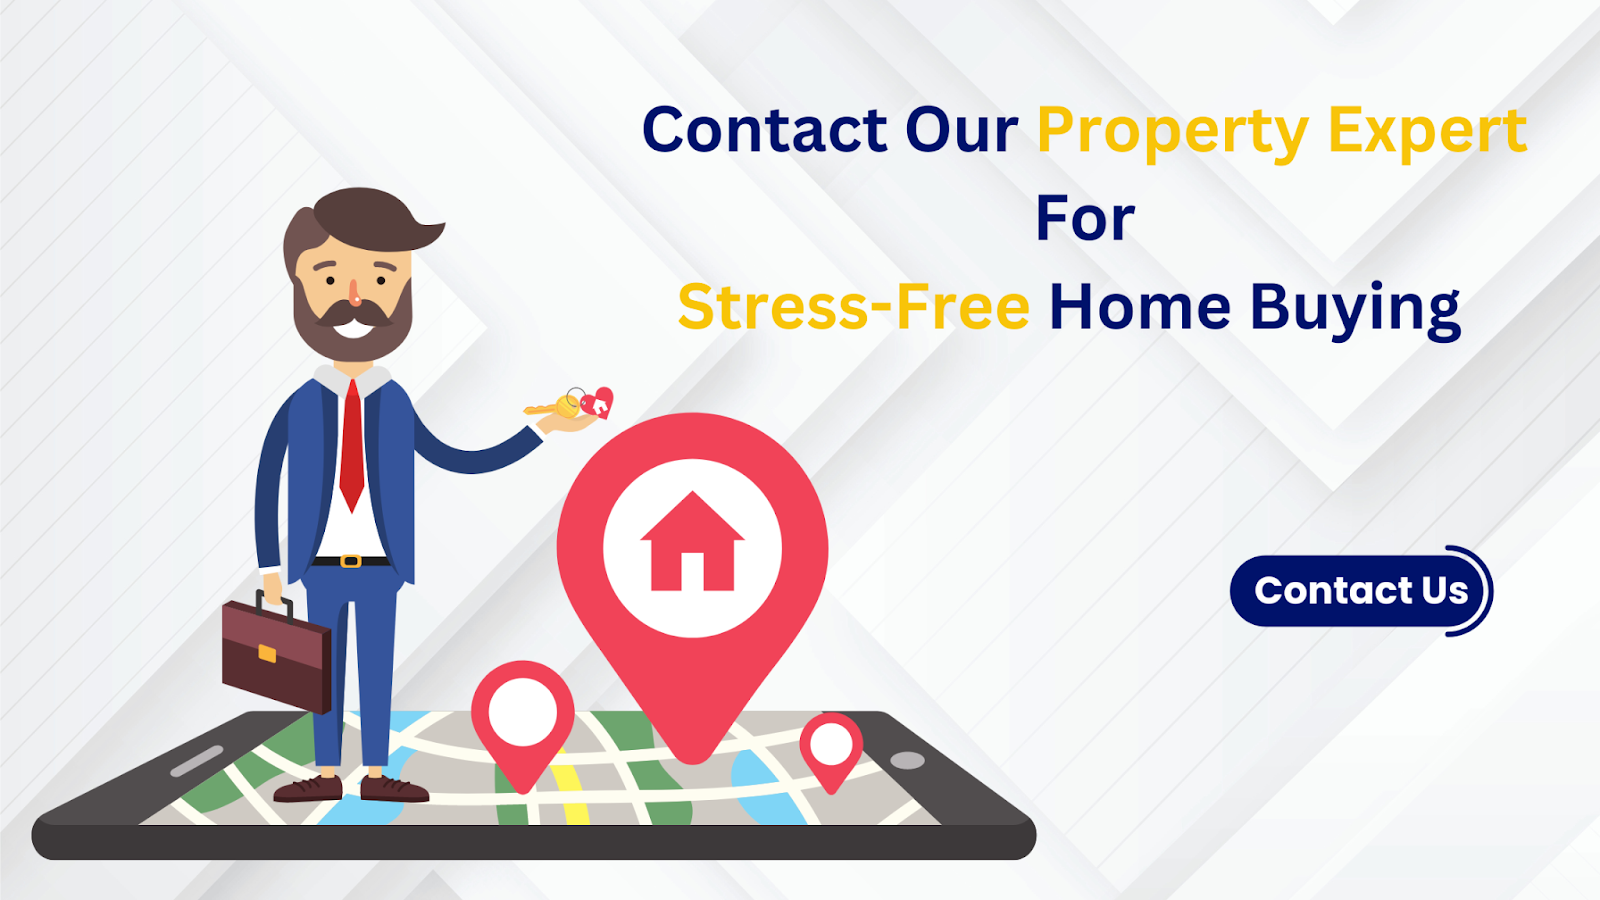 Contact PropertyCloud experts for stress-free home buying